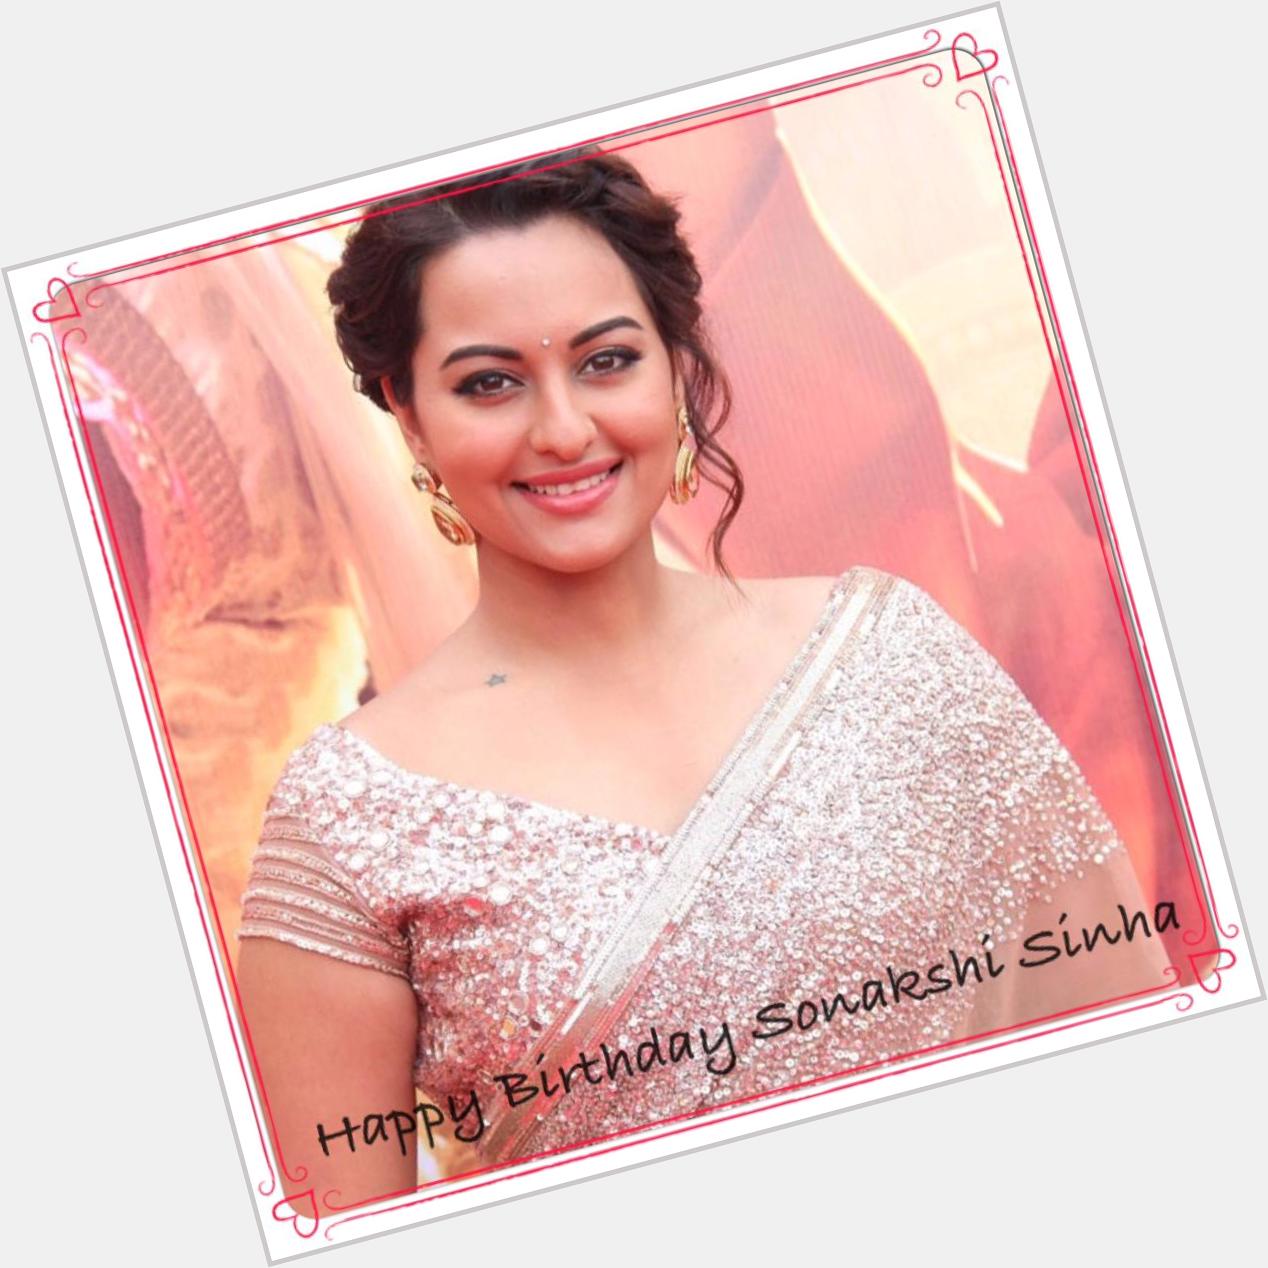 Swee Wishes The Leading Bollywood Actress Sonakshi Sinha A Very Happy Birthday     